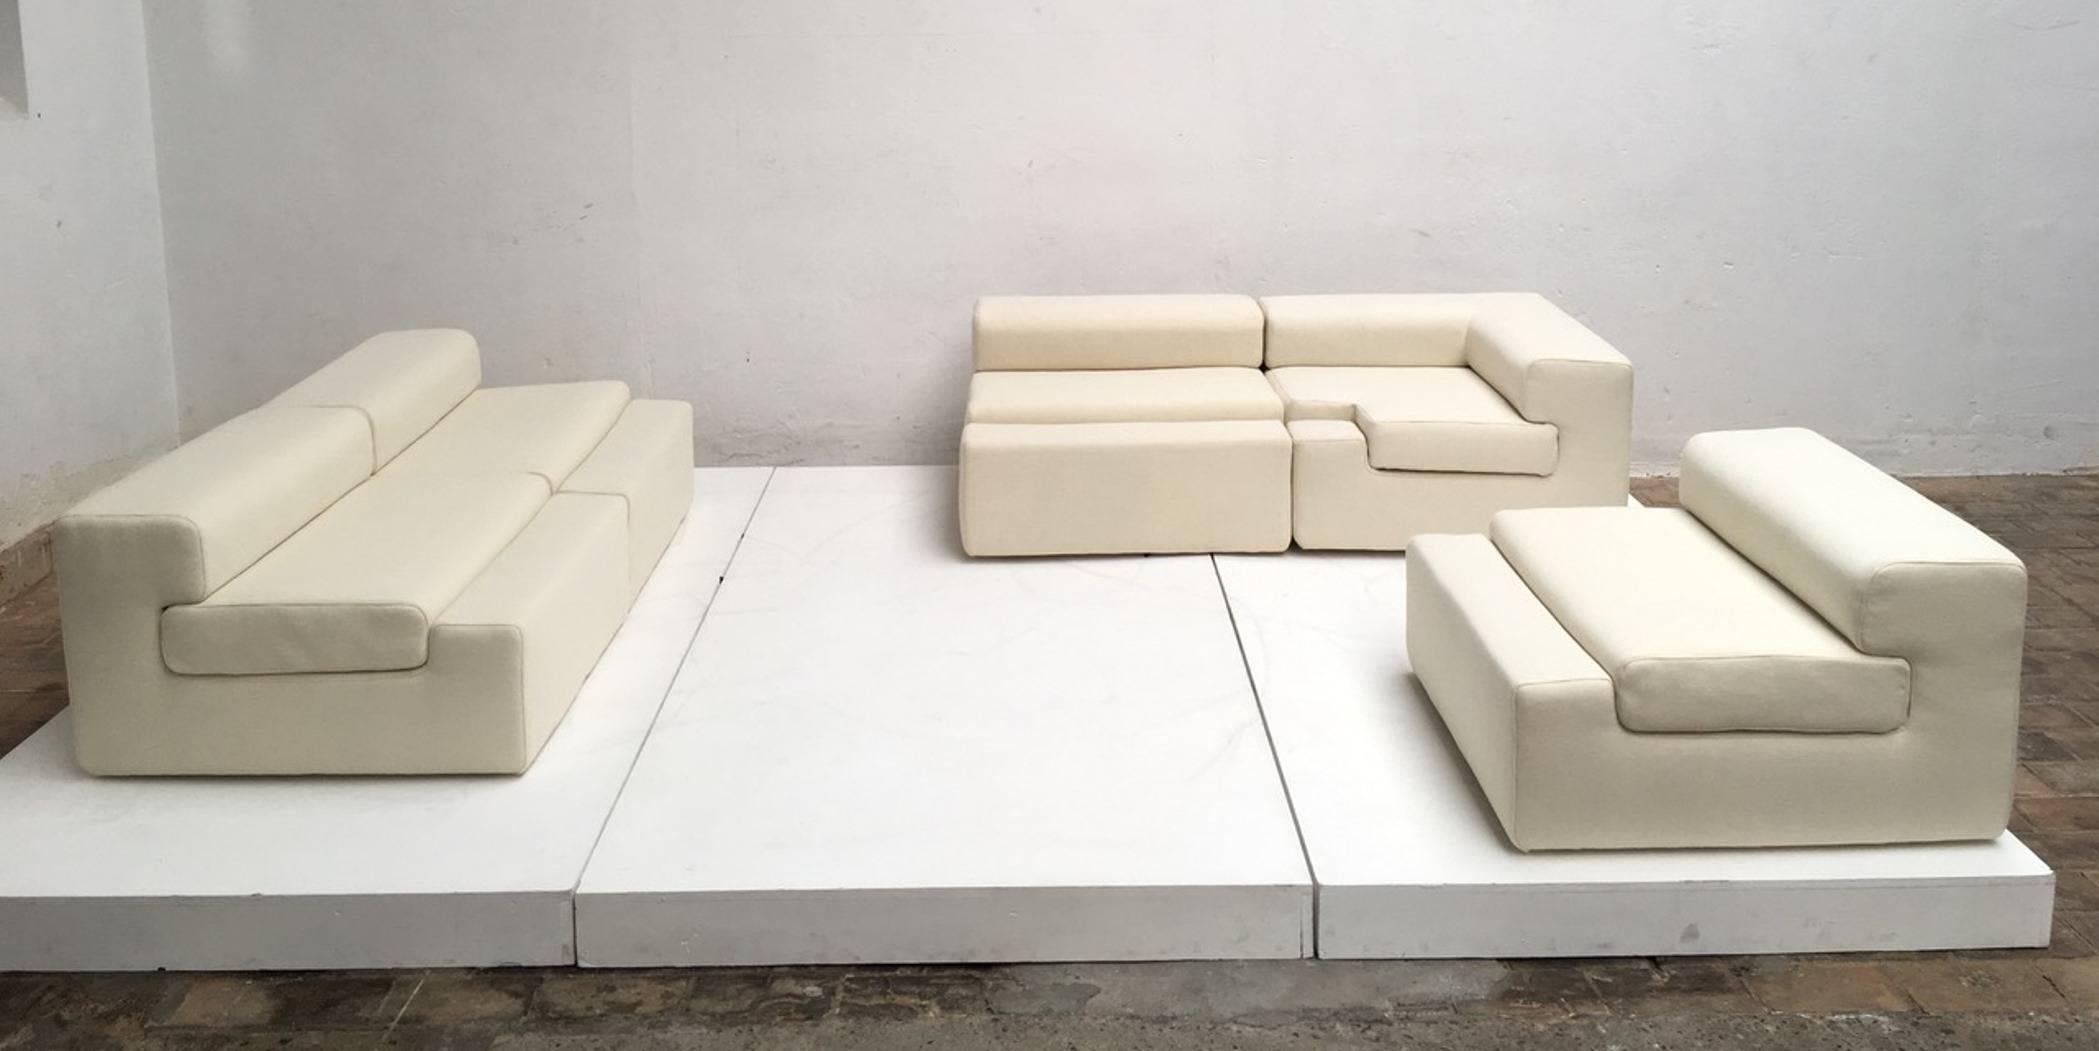 Beautiful and unique sculptural form five-piece modular sofa designed by architect, designer and sculptor Angelo Mangiarotti in 1969 for the 'Casa Vitale' in Milan, Italy. This  sofa is a unique, one off , artisan crafted design by Mangiarotti for